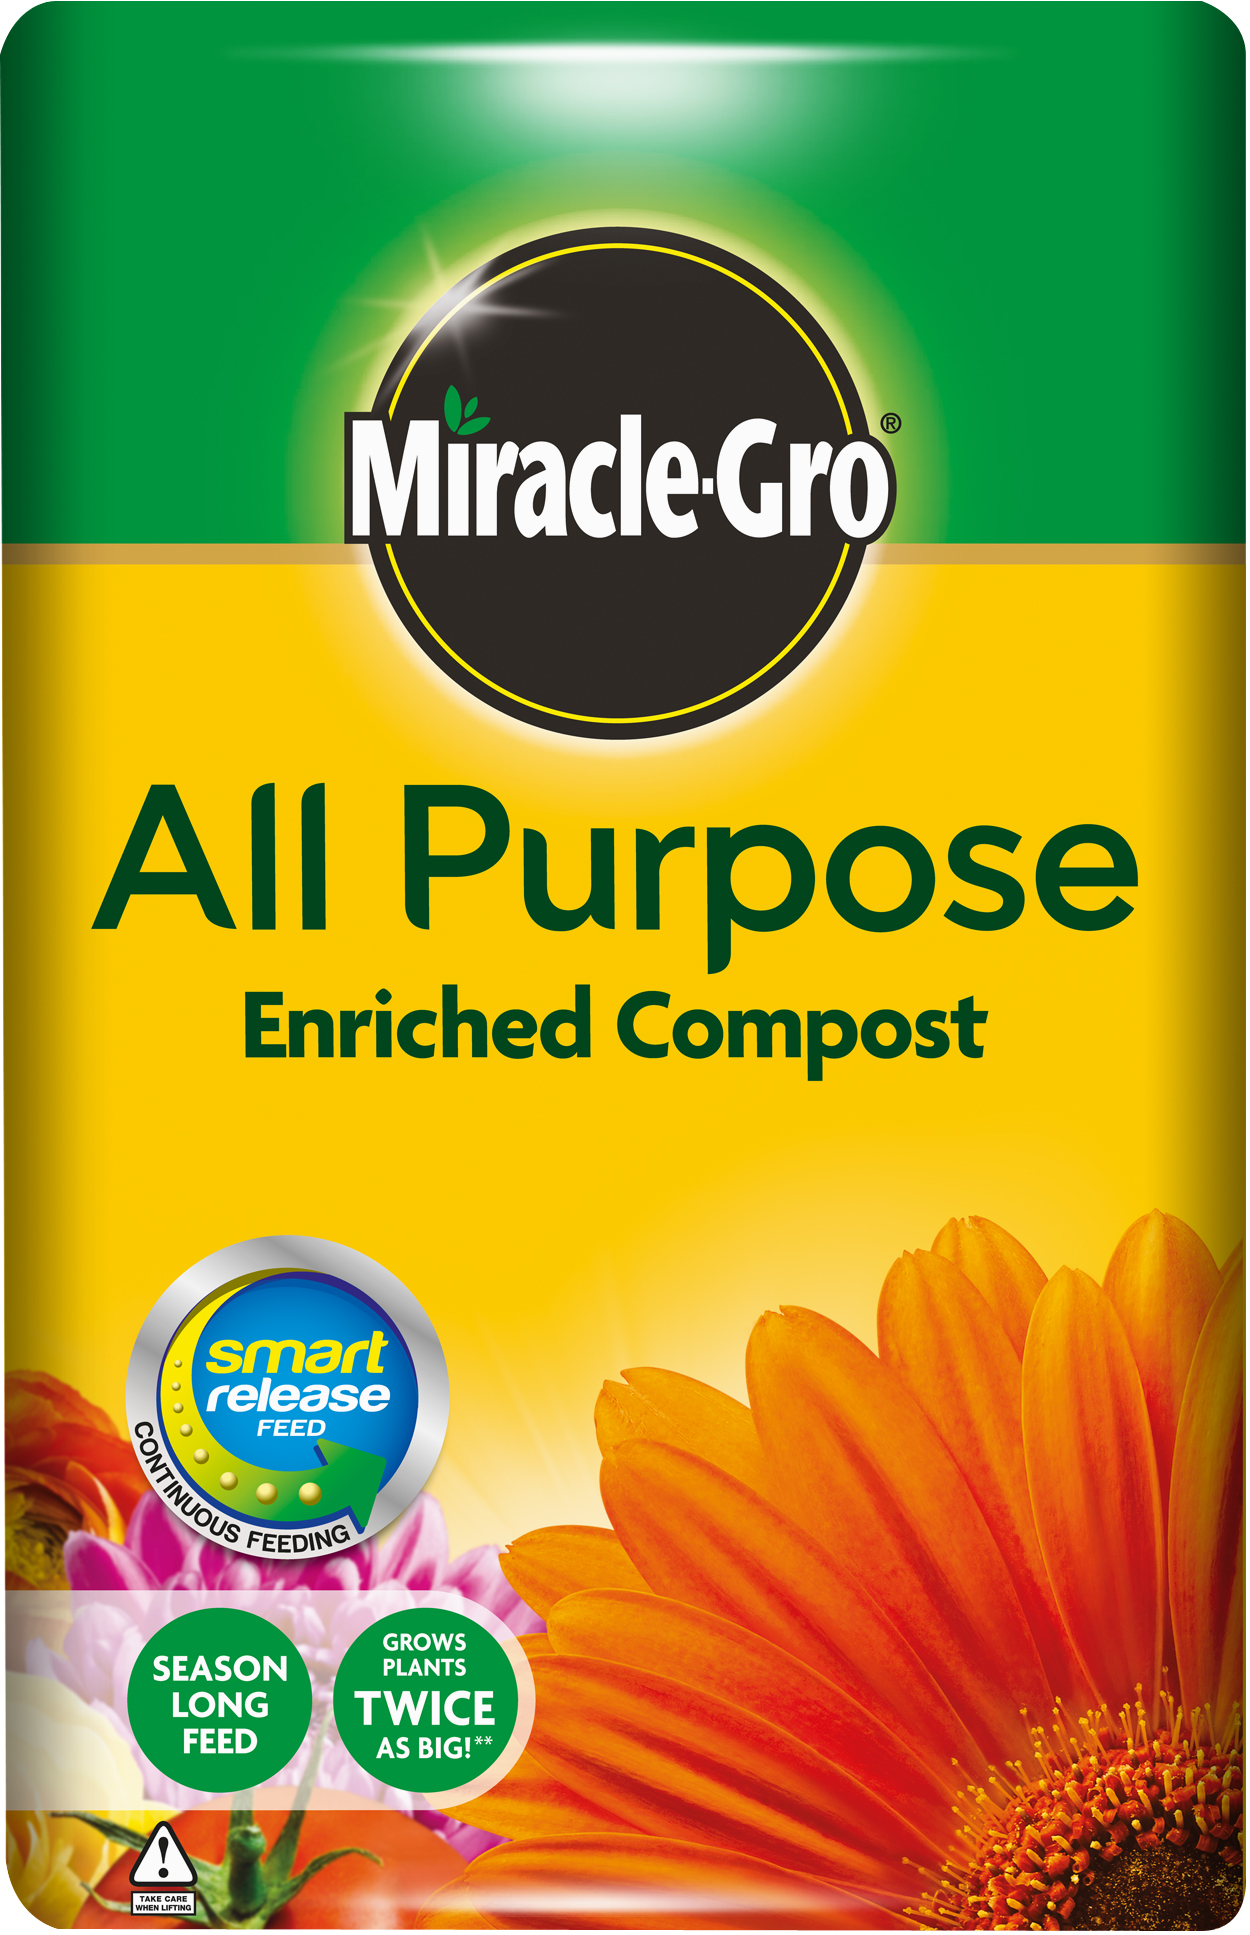 MiracleGro All Purpose Enriched Compost Nareys